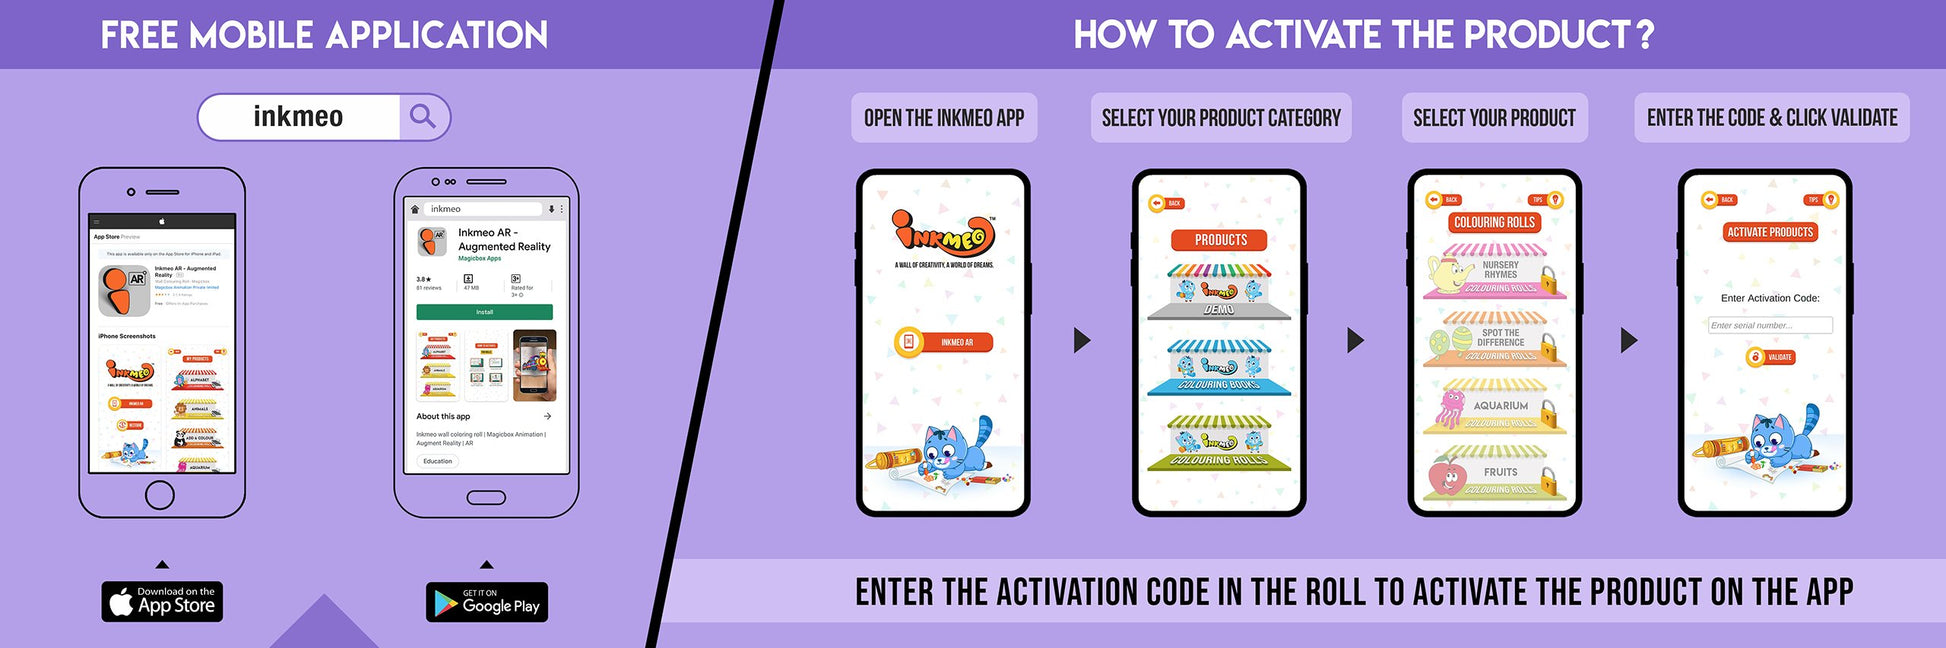 The image has a lavender background which is divided into two parts. The first part shows a free mobile application for downloading the Inkmeo app in the App Store and Google Store. The second part shows four mobile phones with the caption "To open the Inkmeo app, select your product category, select your product, and enter the code & click validate.